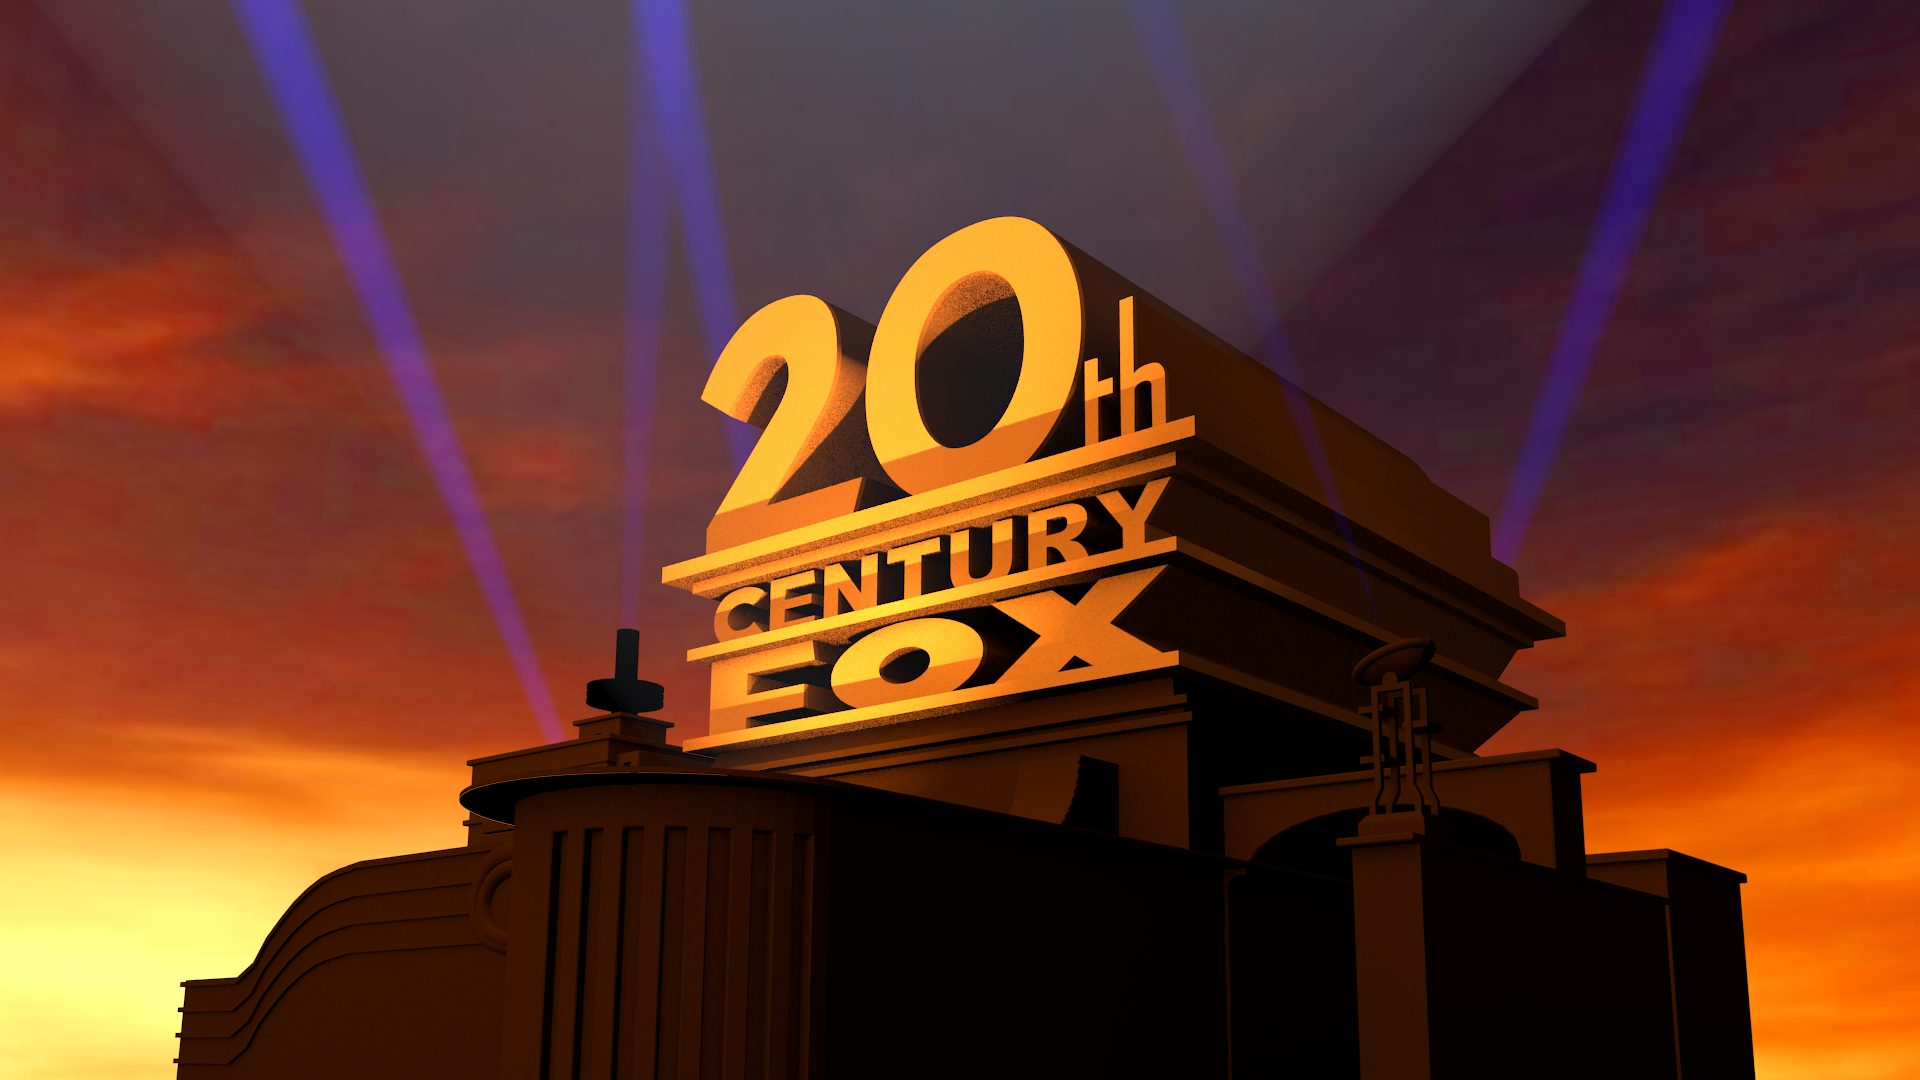 20th century fox after effects template free download